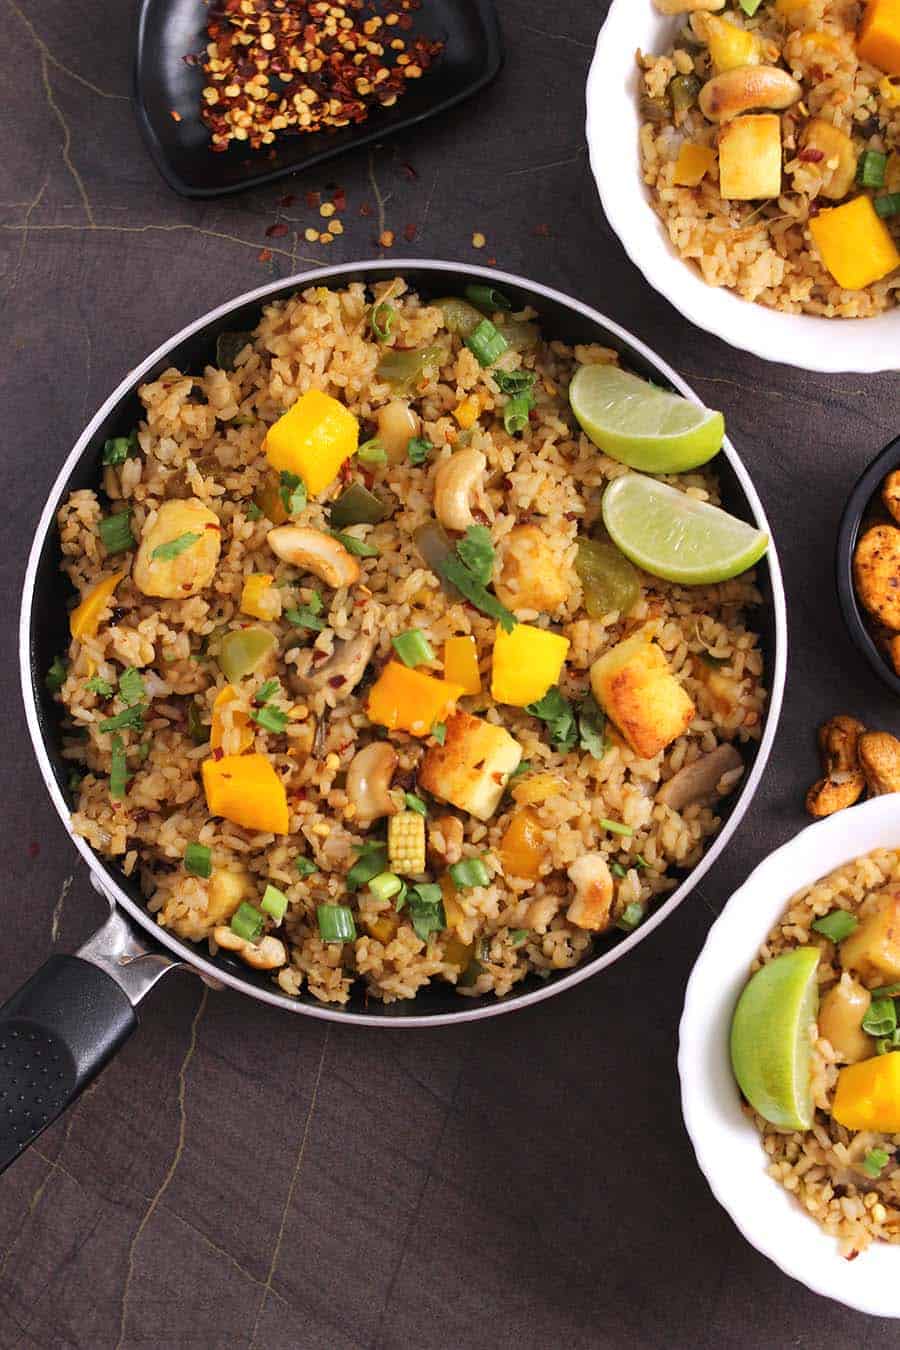 Thai Mango Fried Rice, vegetable or veg or veggie Fried Rice, quick and easy vegetarian meals recipes for lunch and dinner, tofu or paneer fried rice, thai food, instant pot rice #thaibasil #thaistyle #thaifood #friedrice #pineapplefriedrice #veganrice